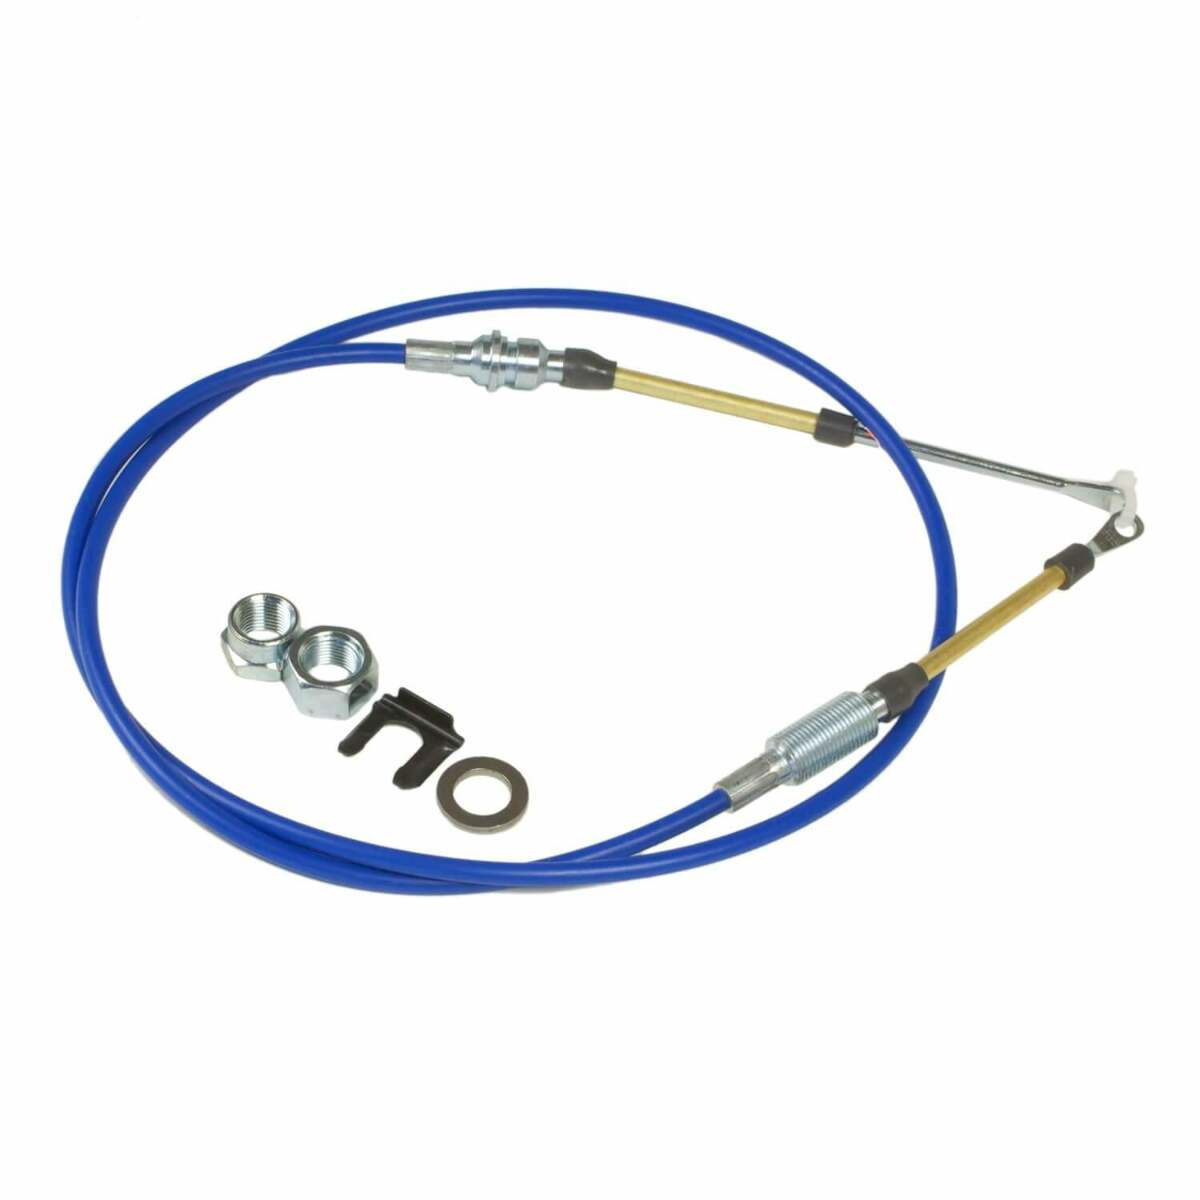 Hurst Shifter Cable - 5-Foot Length - Blue - 5000029